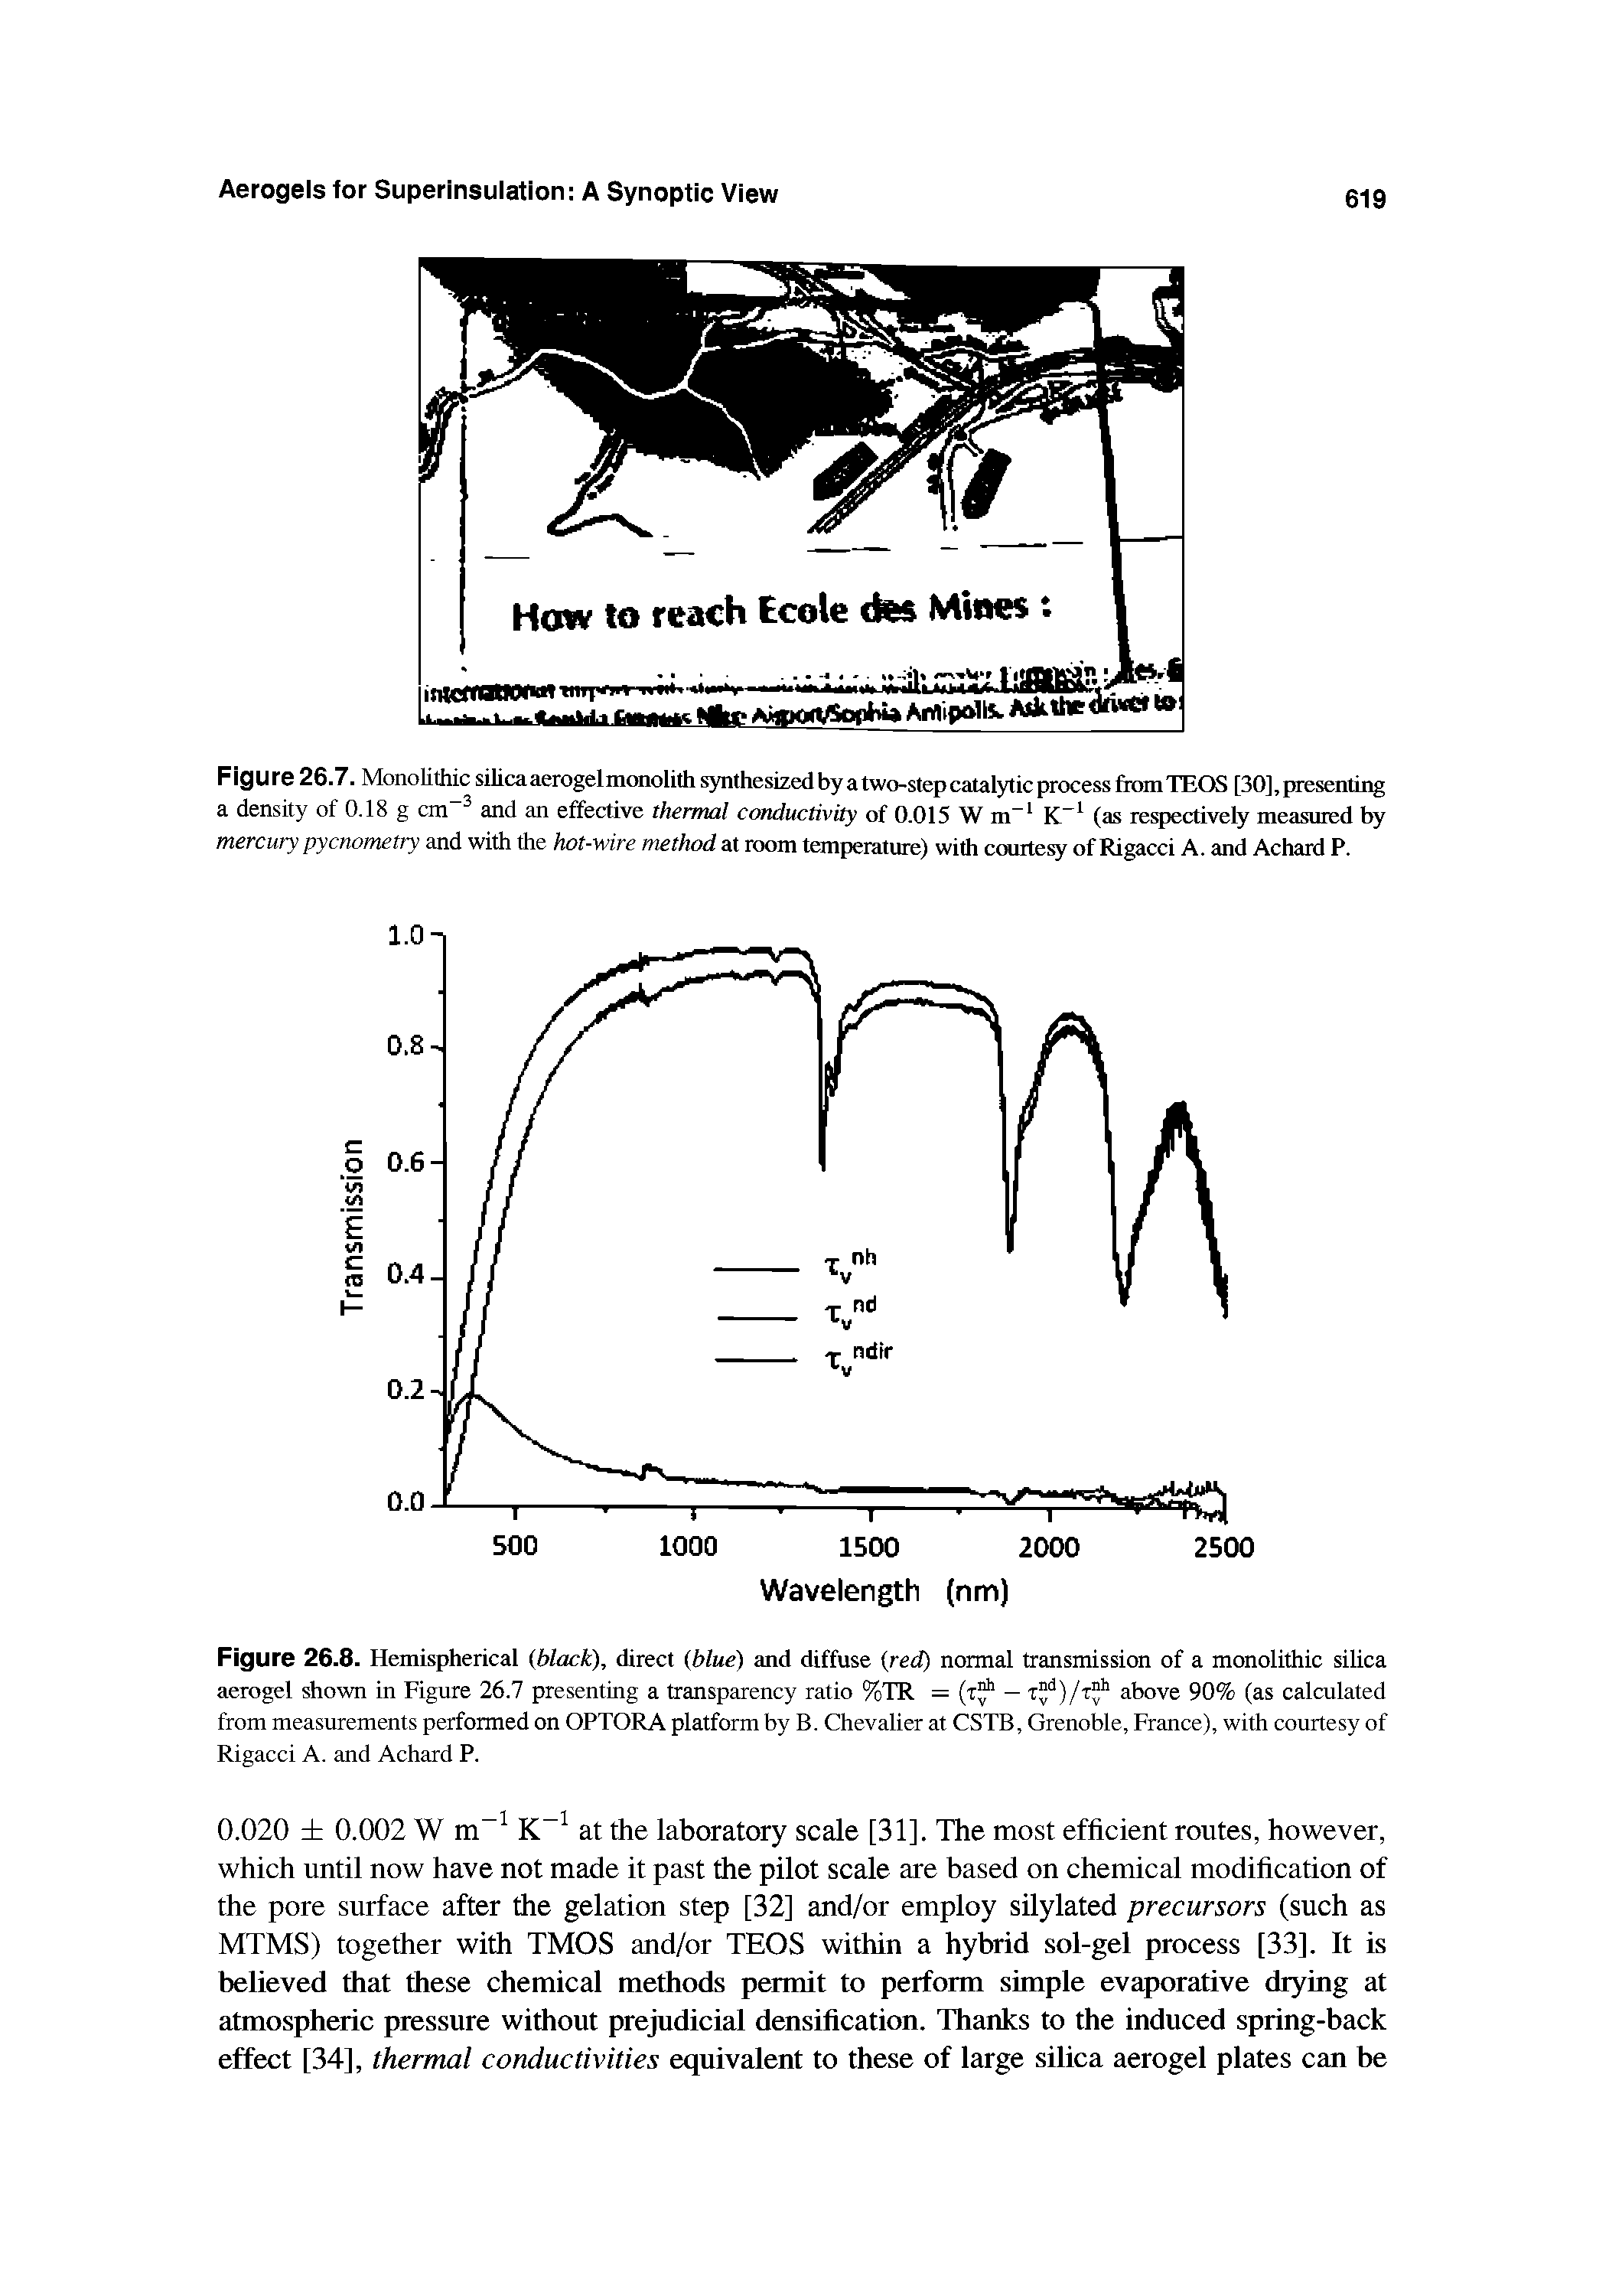 Figure 26.7. Monolithic silicaaerogelmonolith synthesized by a two-step catalytic process from TEOS [30], presenting a density of 0.18 g cm and an effective thermal conductivity of 0.015 W m (as respectively measured by mercury pycnometry and with the hot-wire method at room temperature) with couite of Rigacci A. and Achard P.